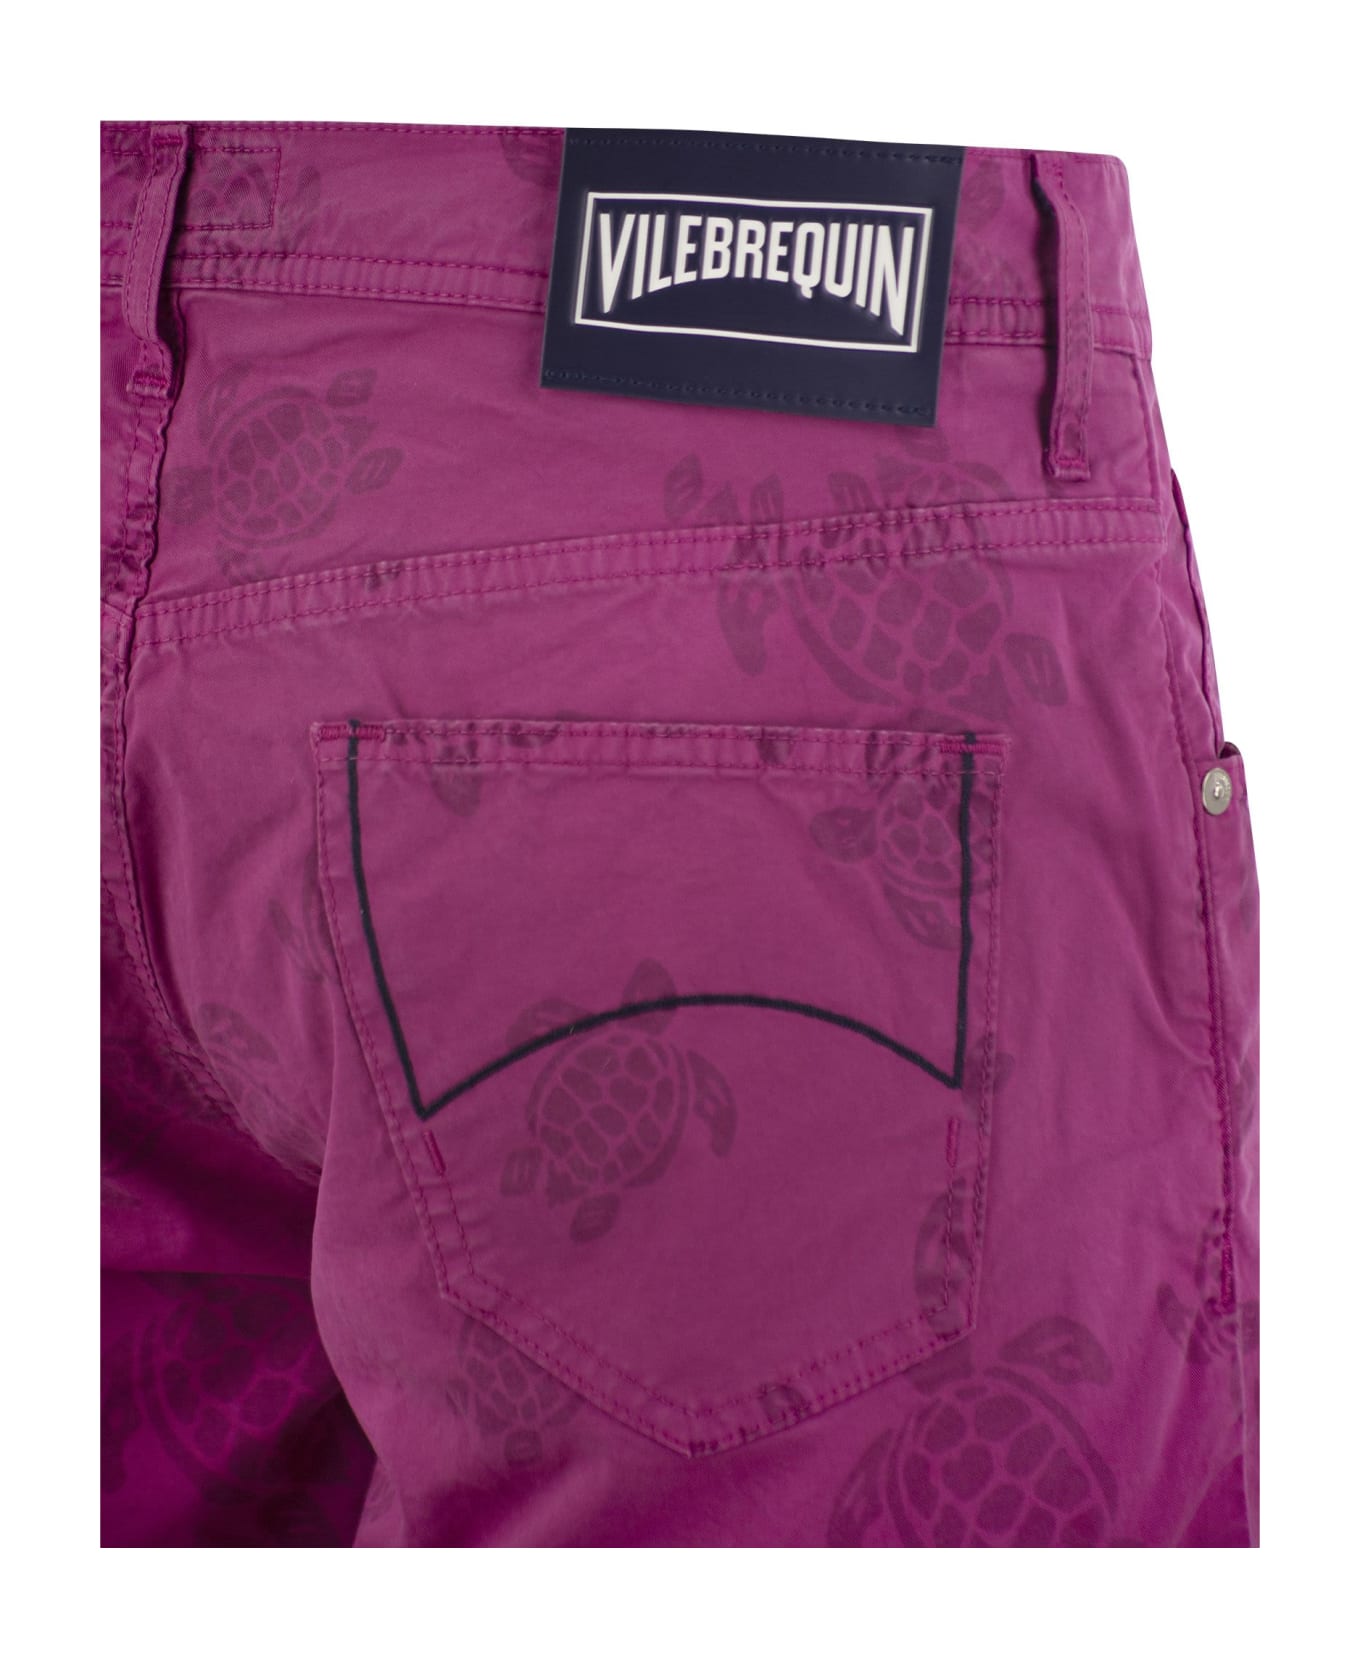 Vilebrequin Bermuda Shorts With Ronde Des Tortues Resin Print - Fuchsia